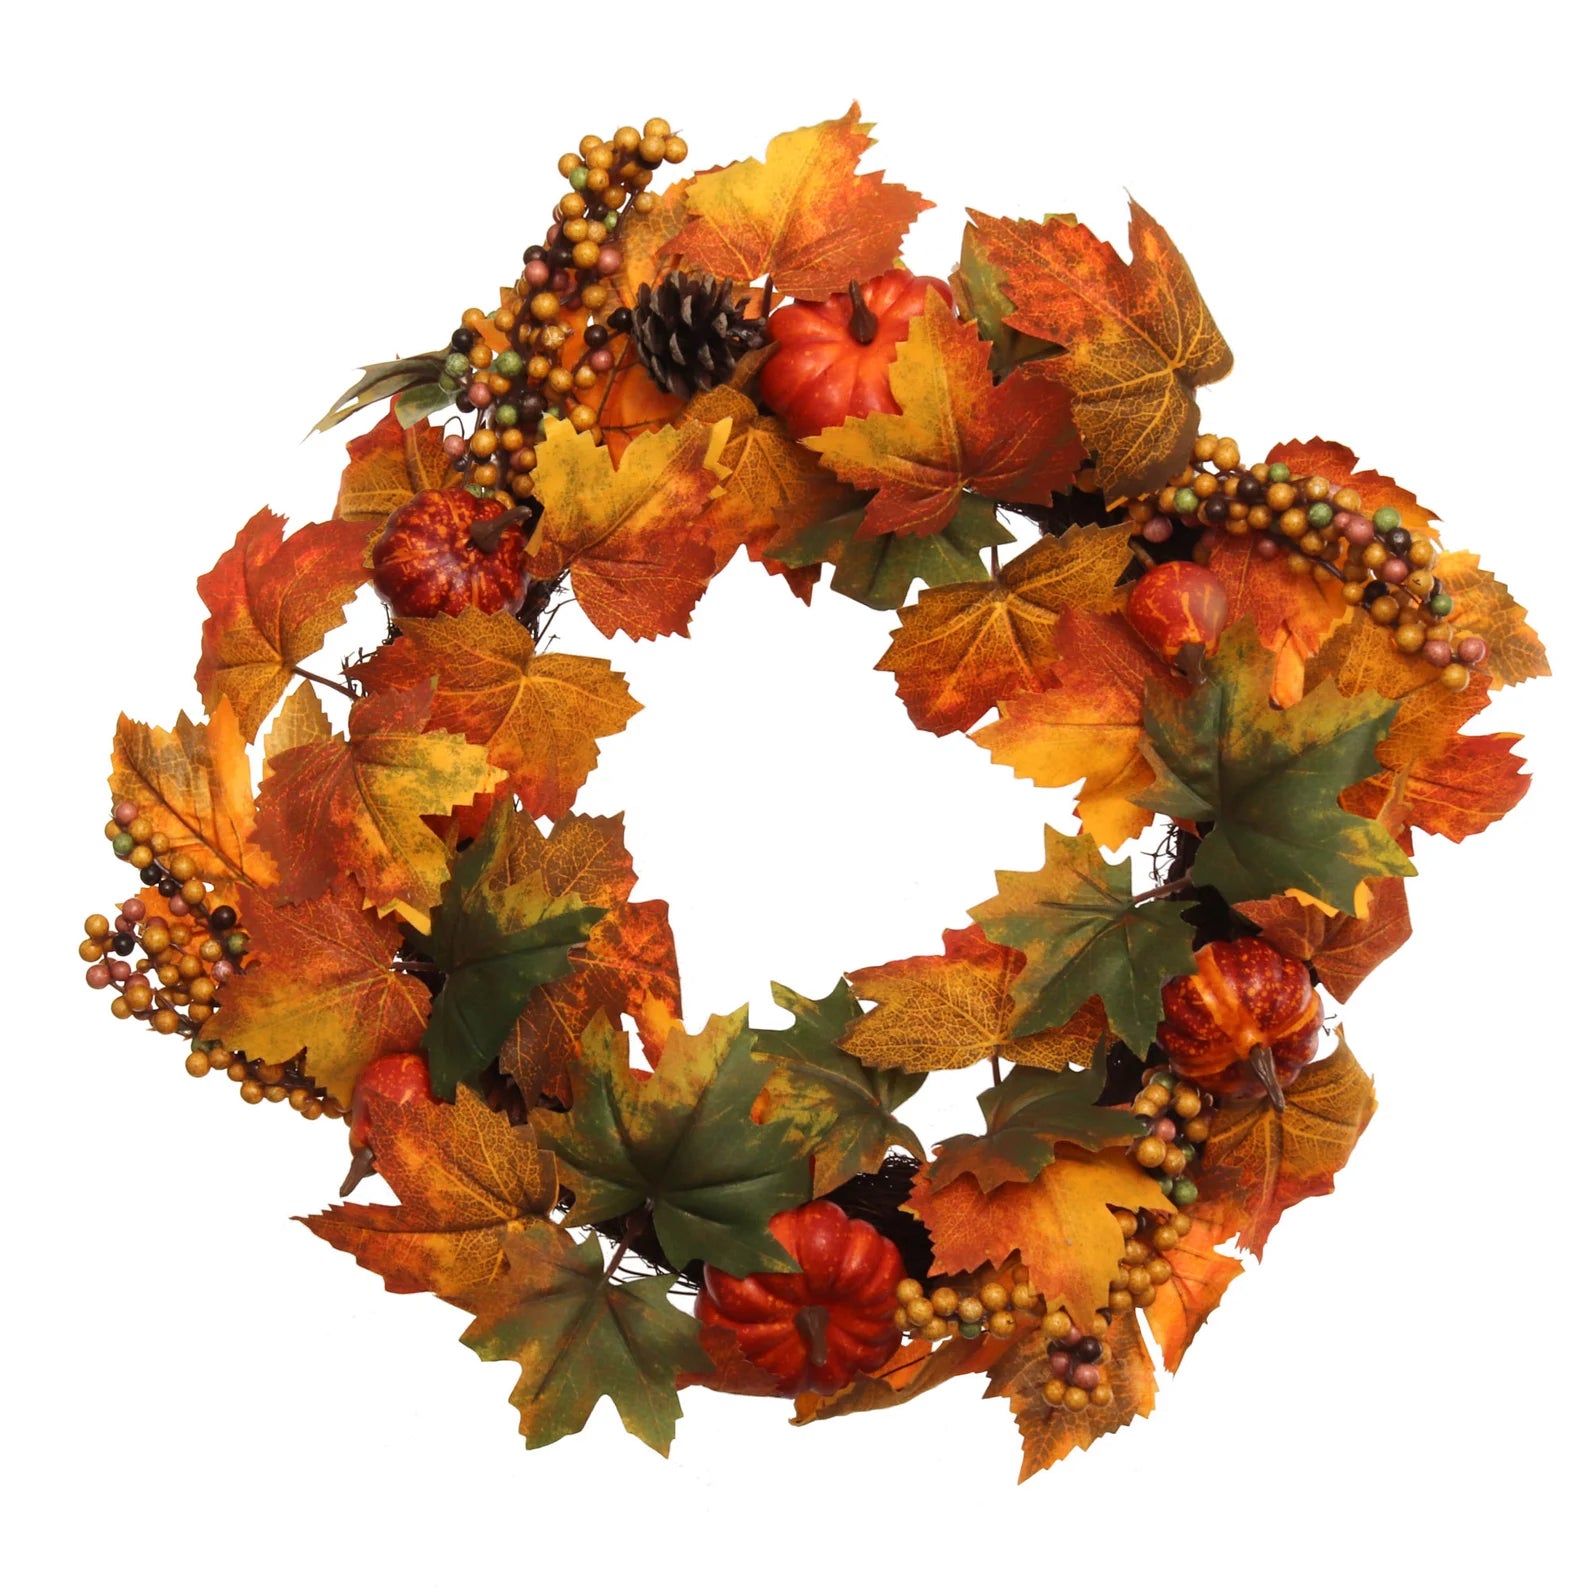 18" Artificial Fall Maple Leaf with Berries and Gourds Wreath Wreaths ArtificialFlowers   